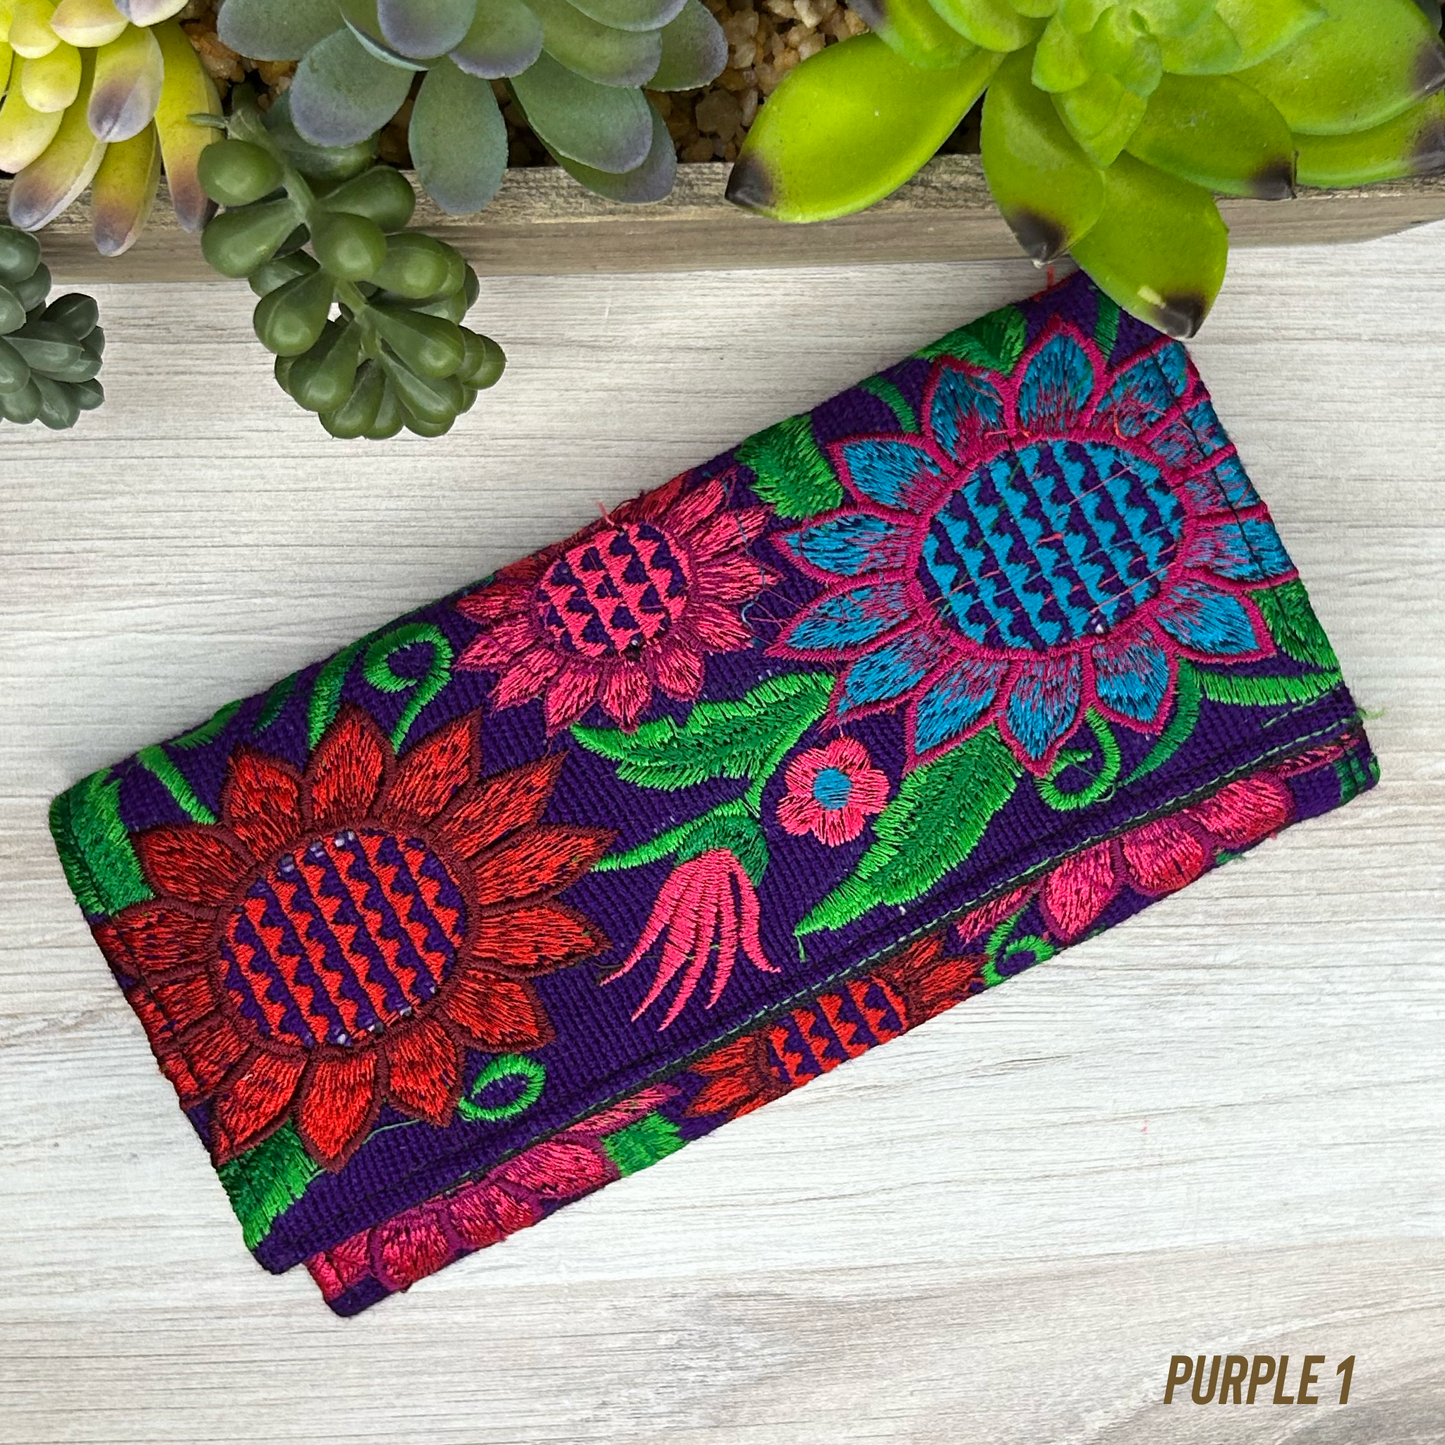 Mexican Embroidered Wallet - Zinnia